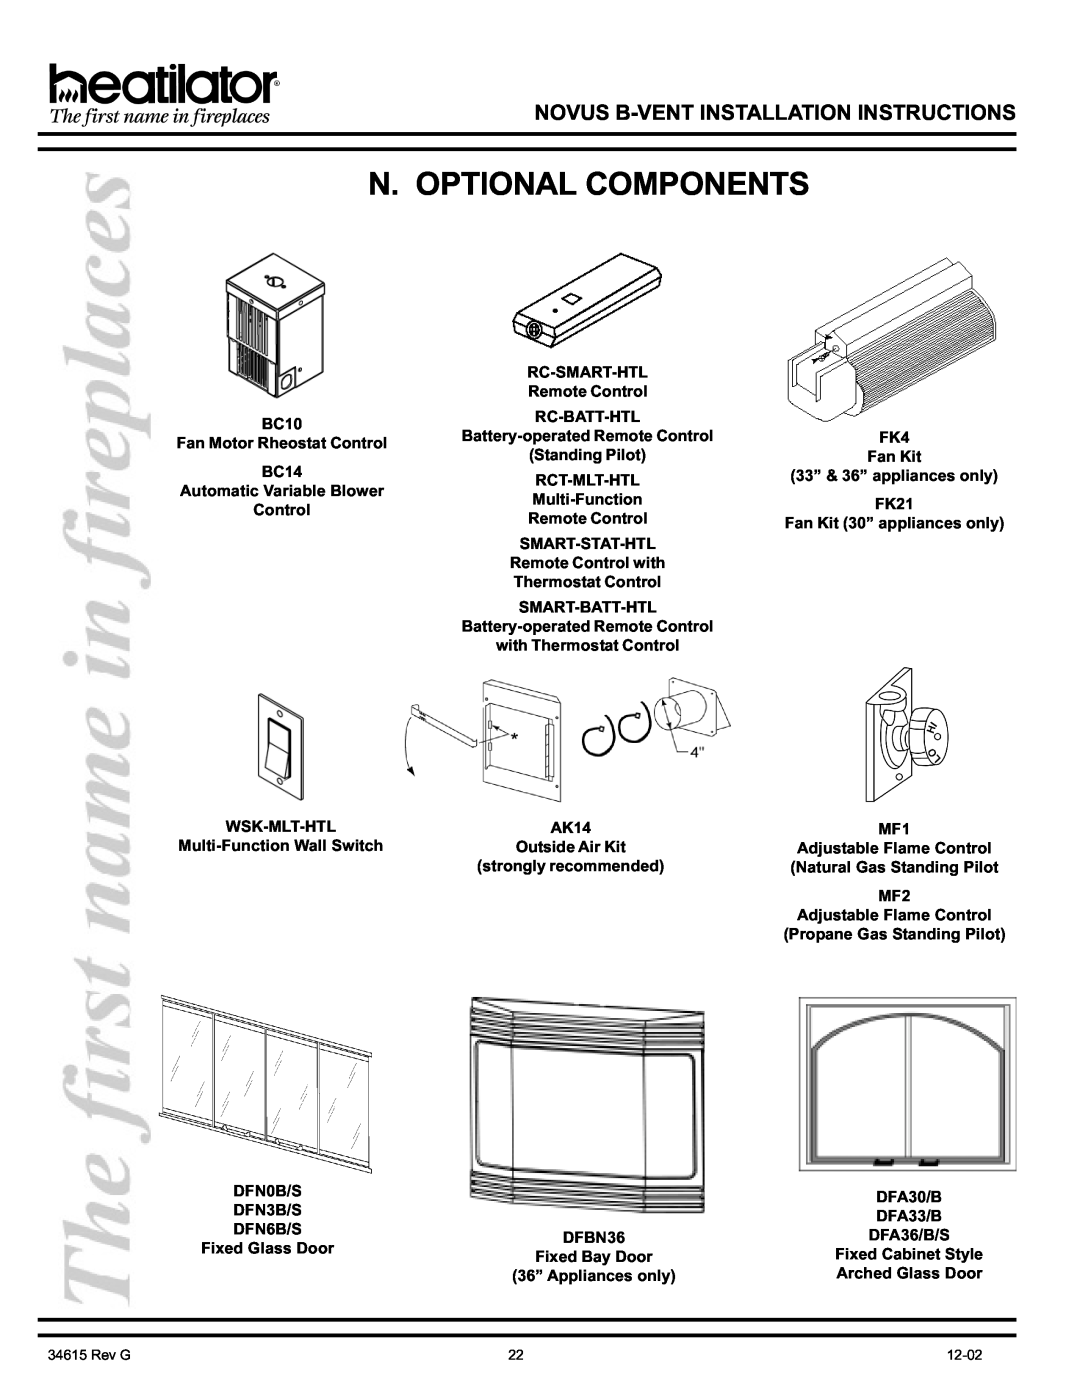 Hearth and Home Technologies GNBC36 manual N. Optional Components, Novus B-Ventinstallation Instructions, Fixed Glass Door 